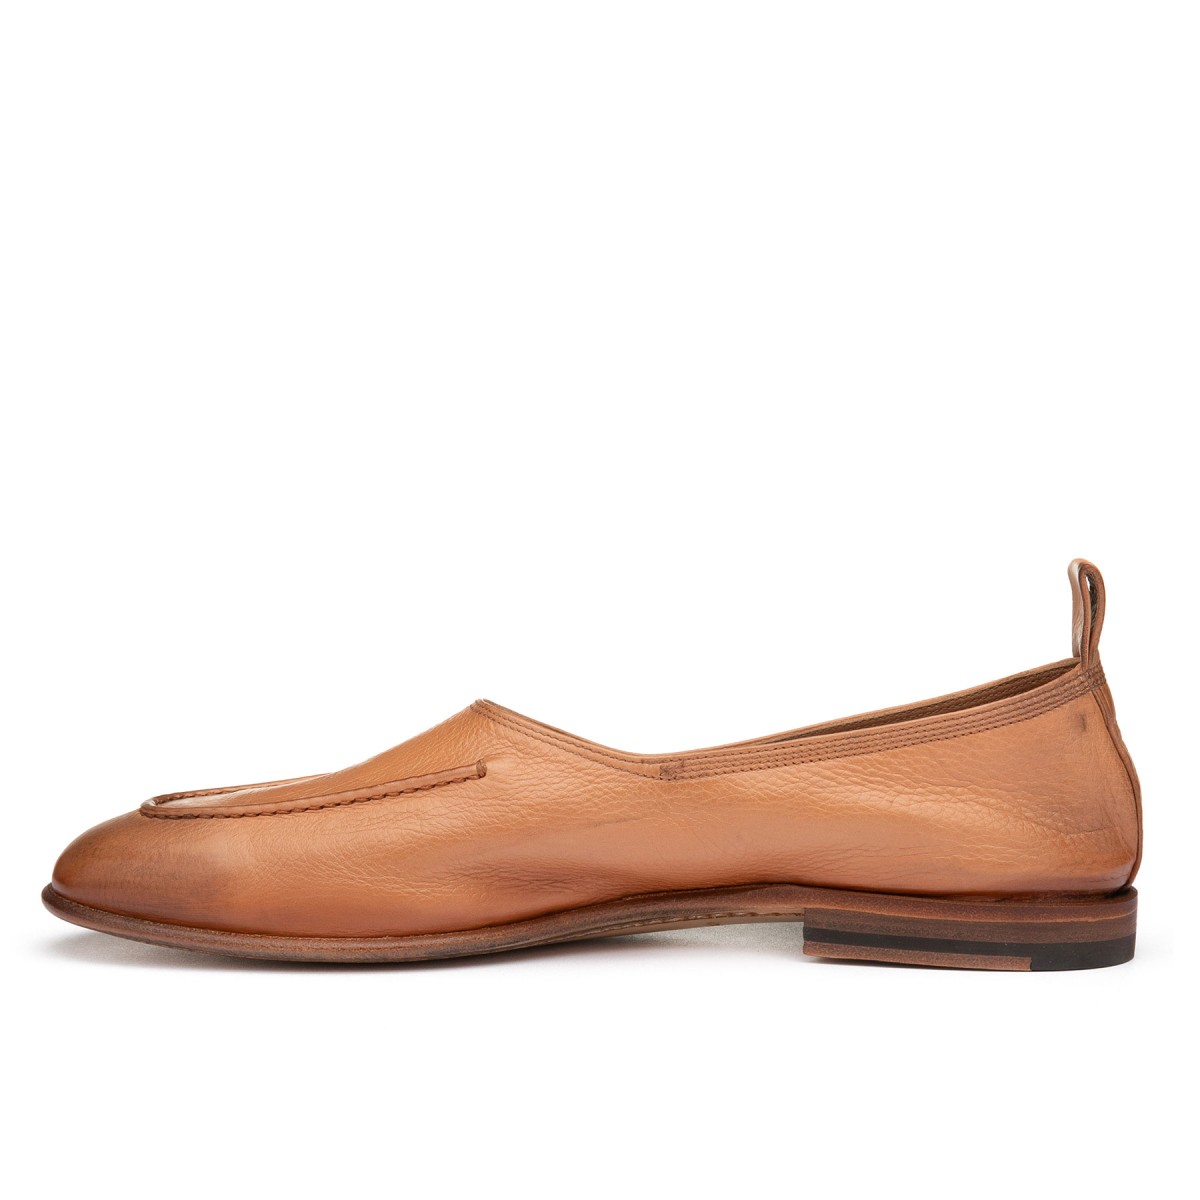 Caramel-hue leather slippers